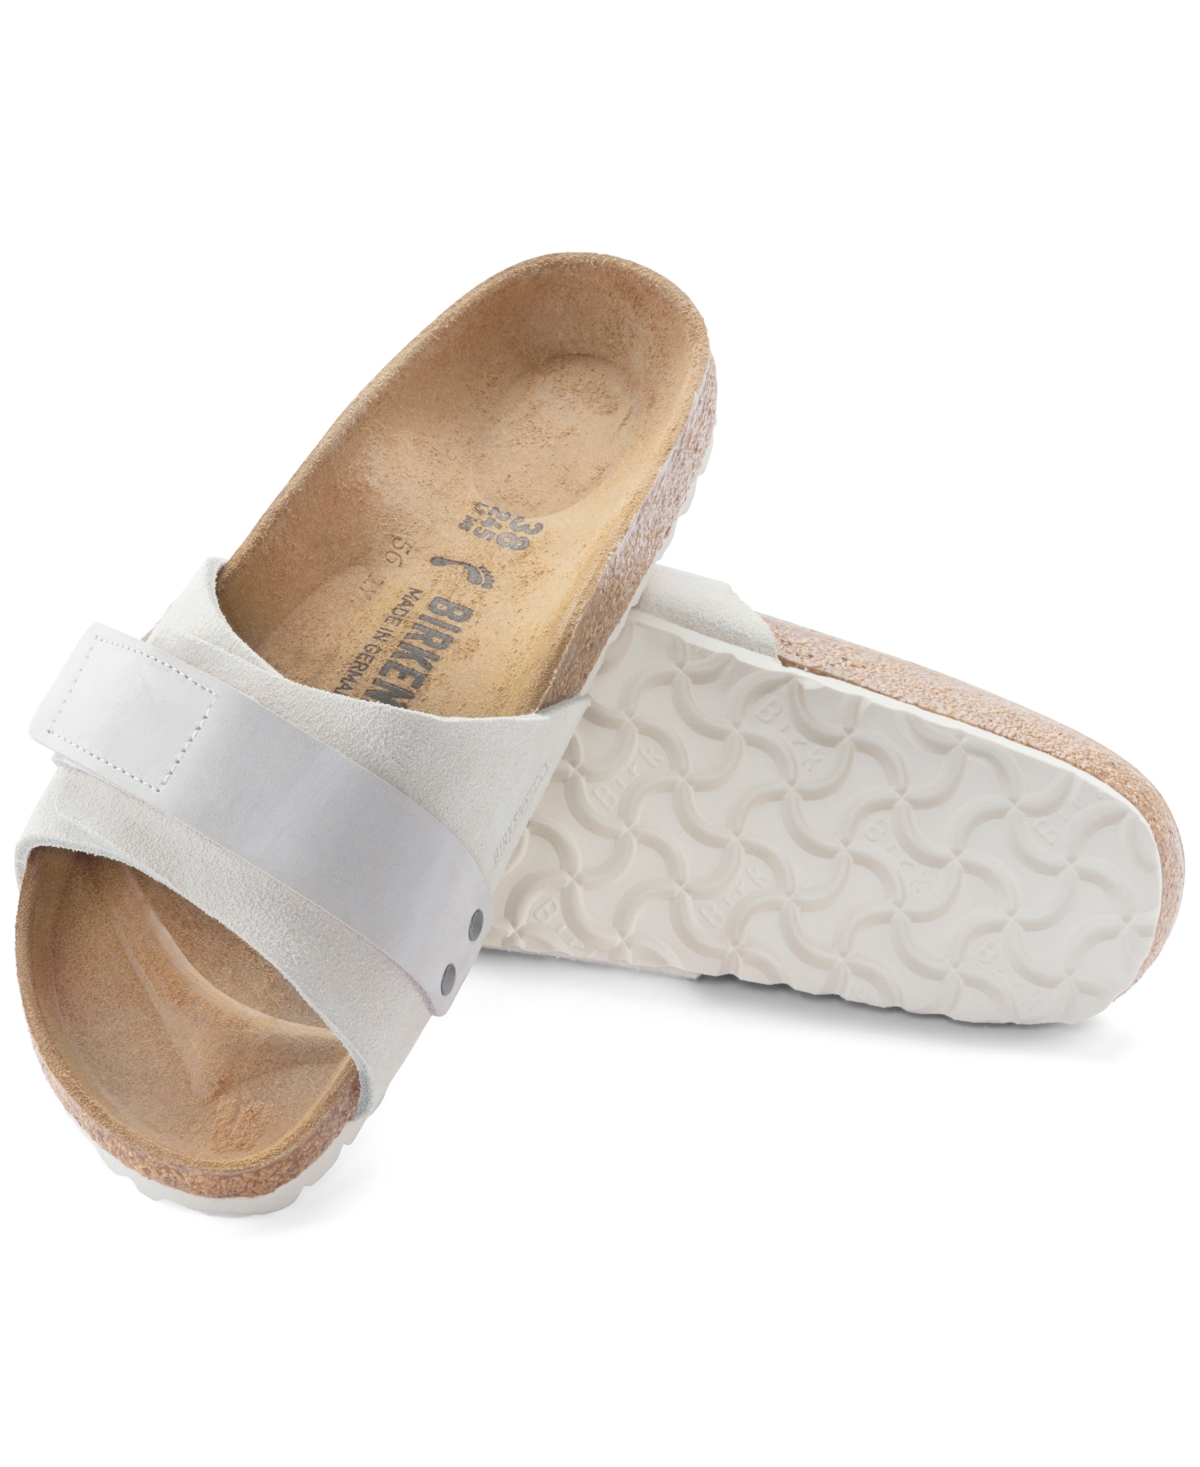 Shop Birkenstock Women's Oita Suede Leather Slide Sandals From Finish Line In Antique-like White